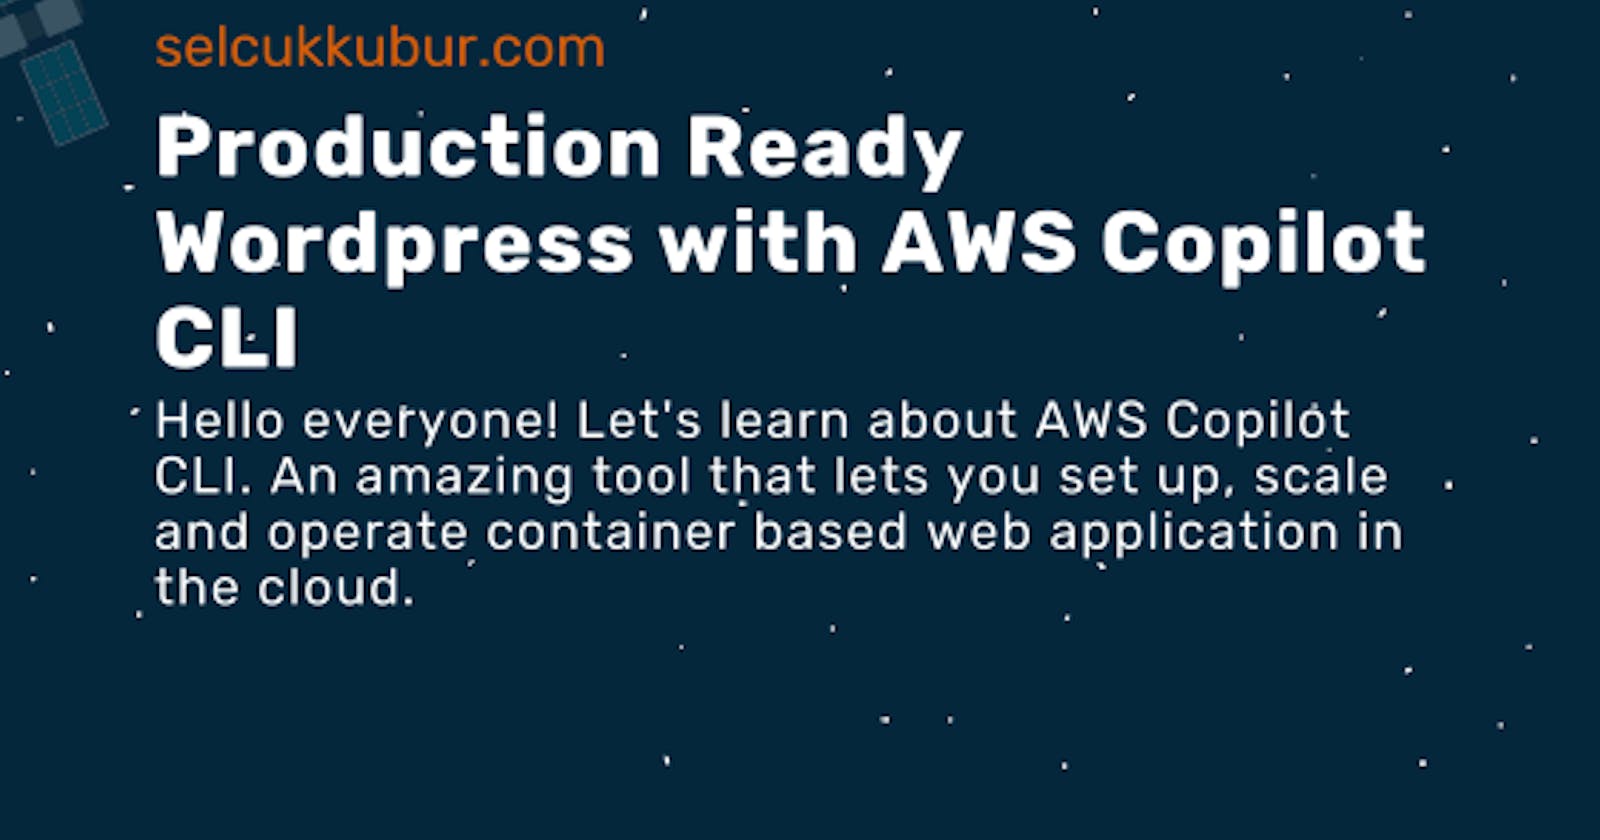 Deploying a production ready Wordpress site in minutes with AWS Copilot CLI